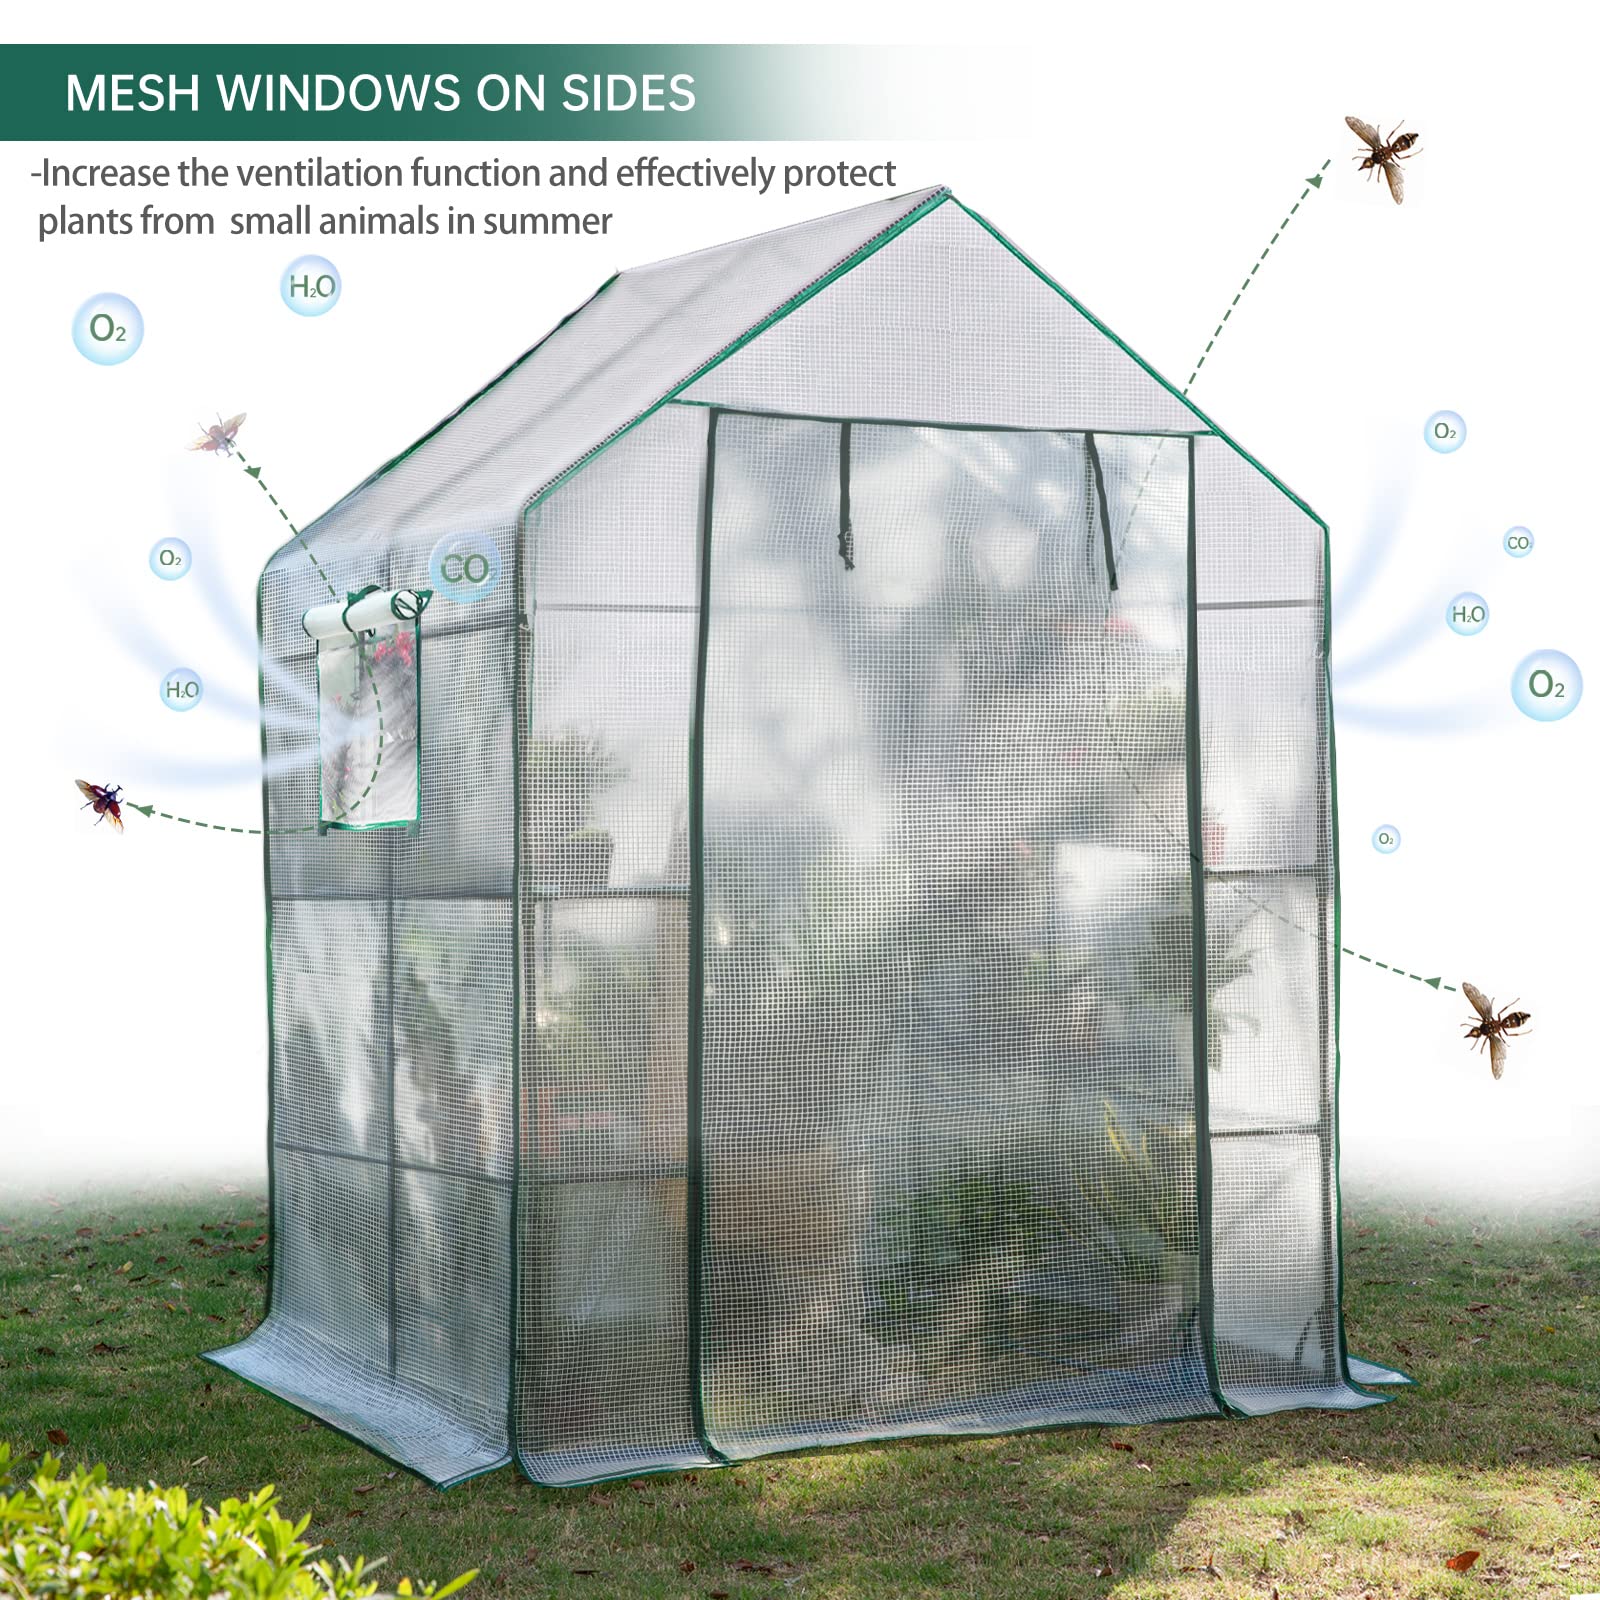 Greenhouses for Outdoors,Portable Walk in Greenhouse for Garden Plants That Need Frost Protection and Away from Pests,Animals(56"x55"x78")-White